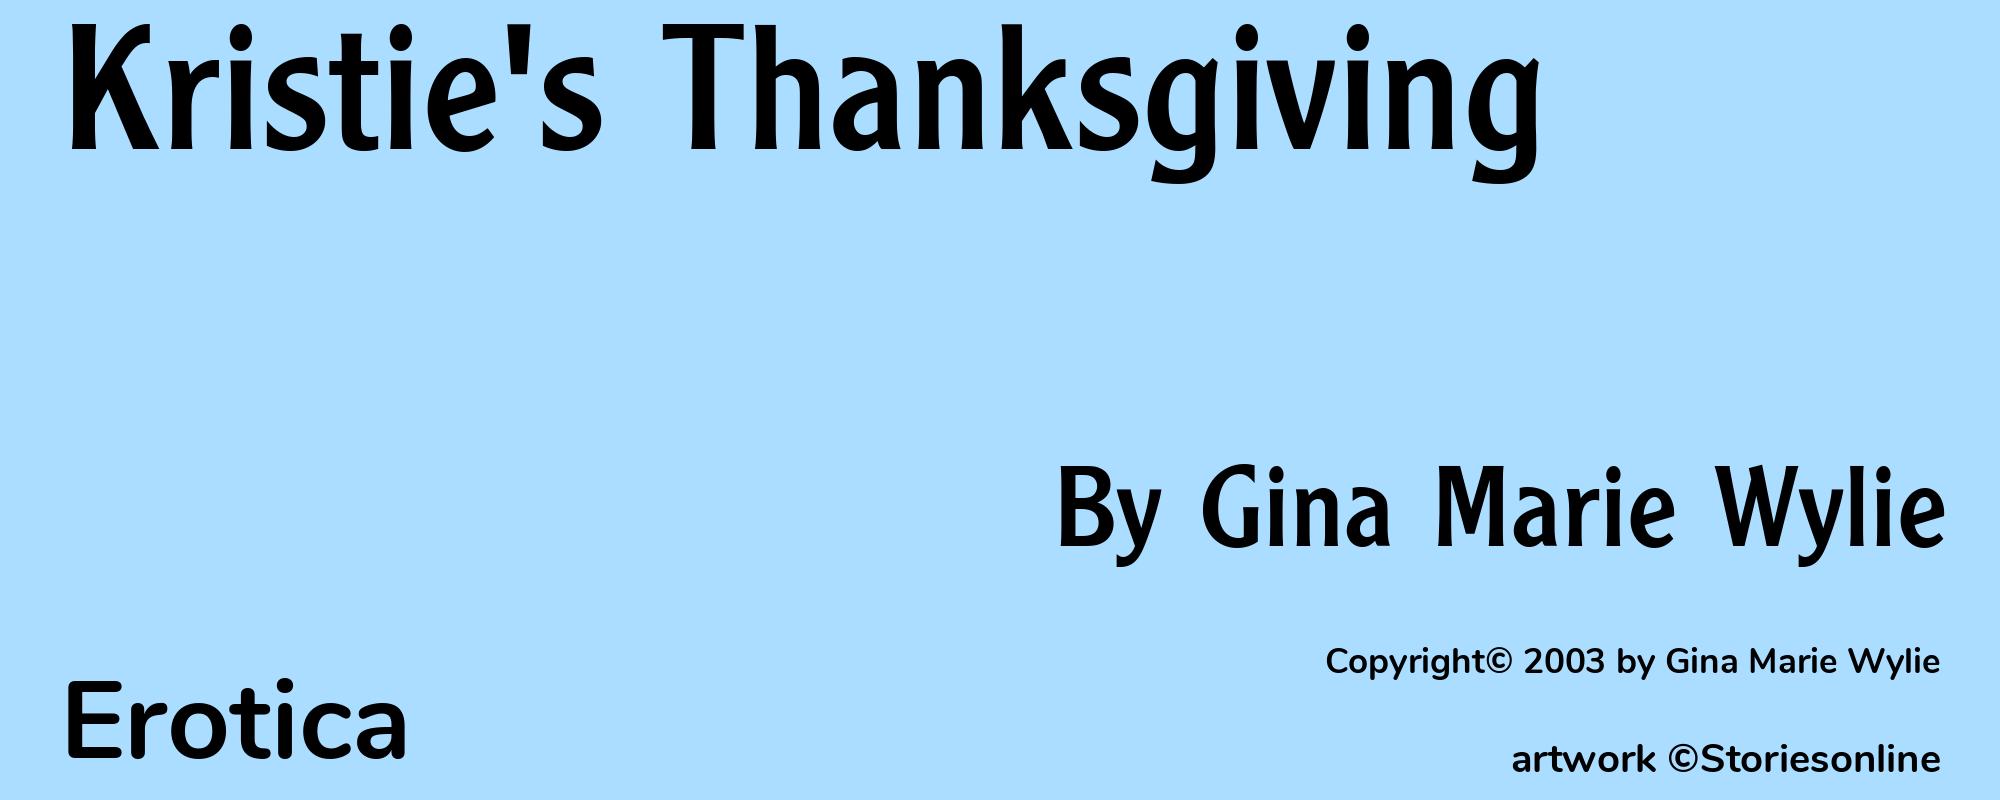 Kristie's Thanksgiving - Cover